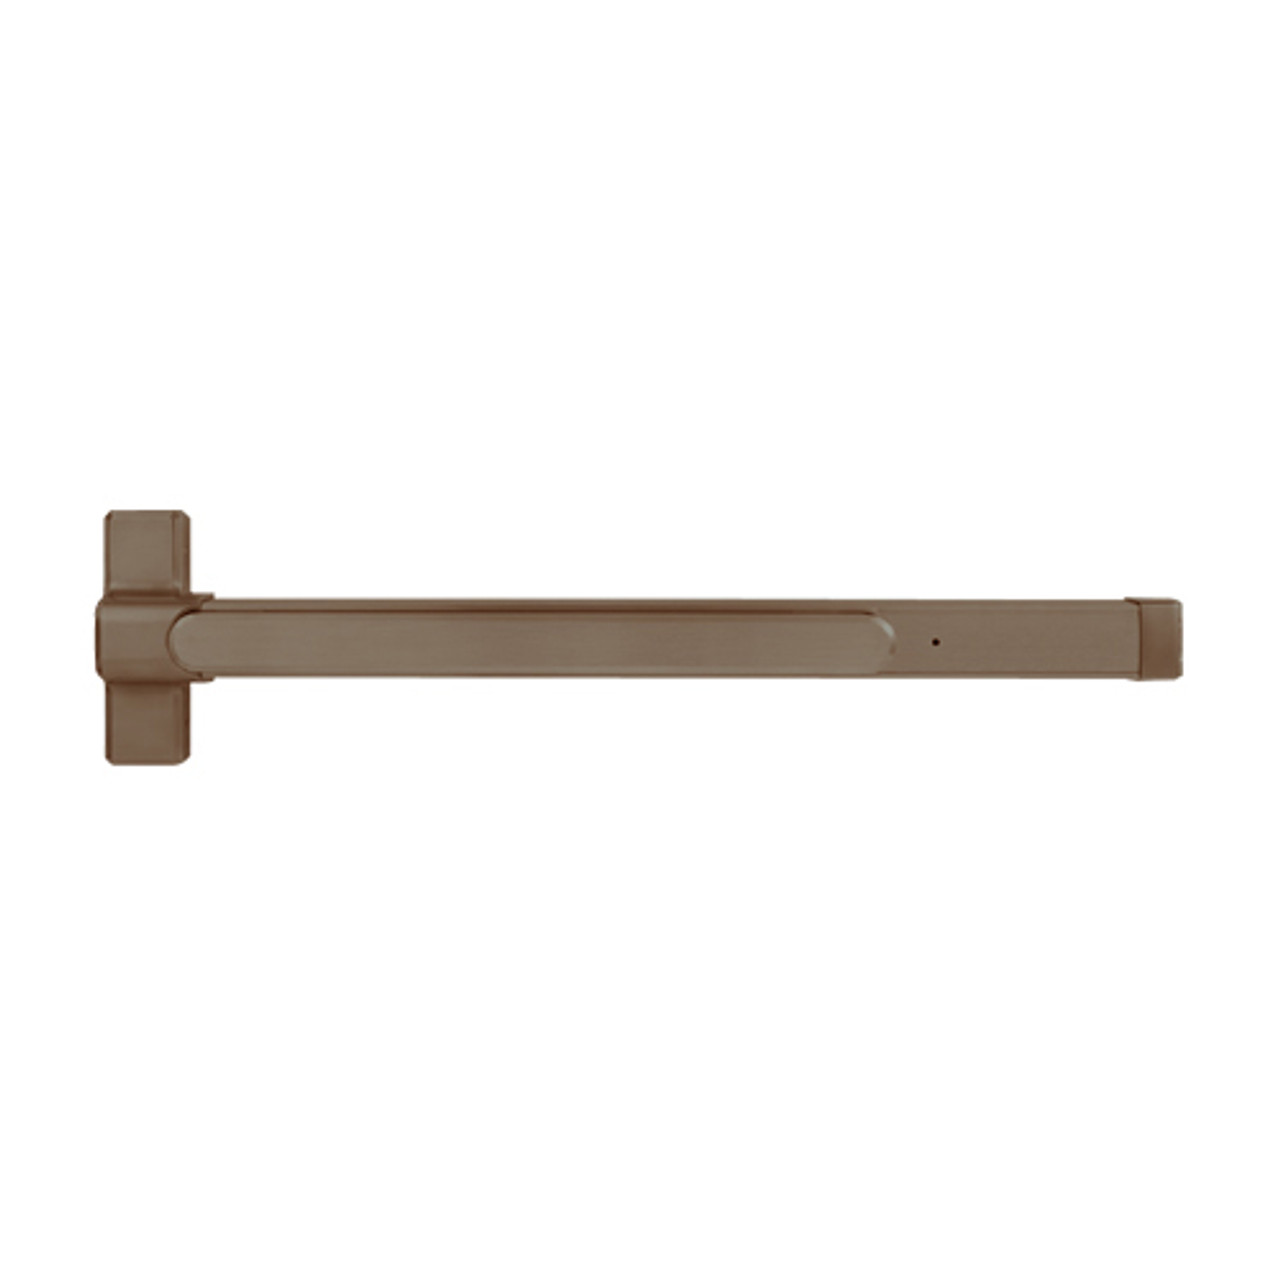 QED127ED-48-8-313AN Stanley QED100 Series Heavy Duty Concealed Vertical Rod Hex Dog Exit Device in Anodized Duranodic Bronze Finish